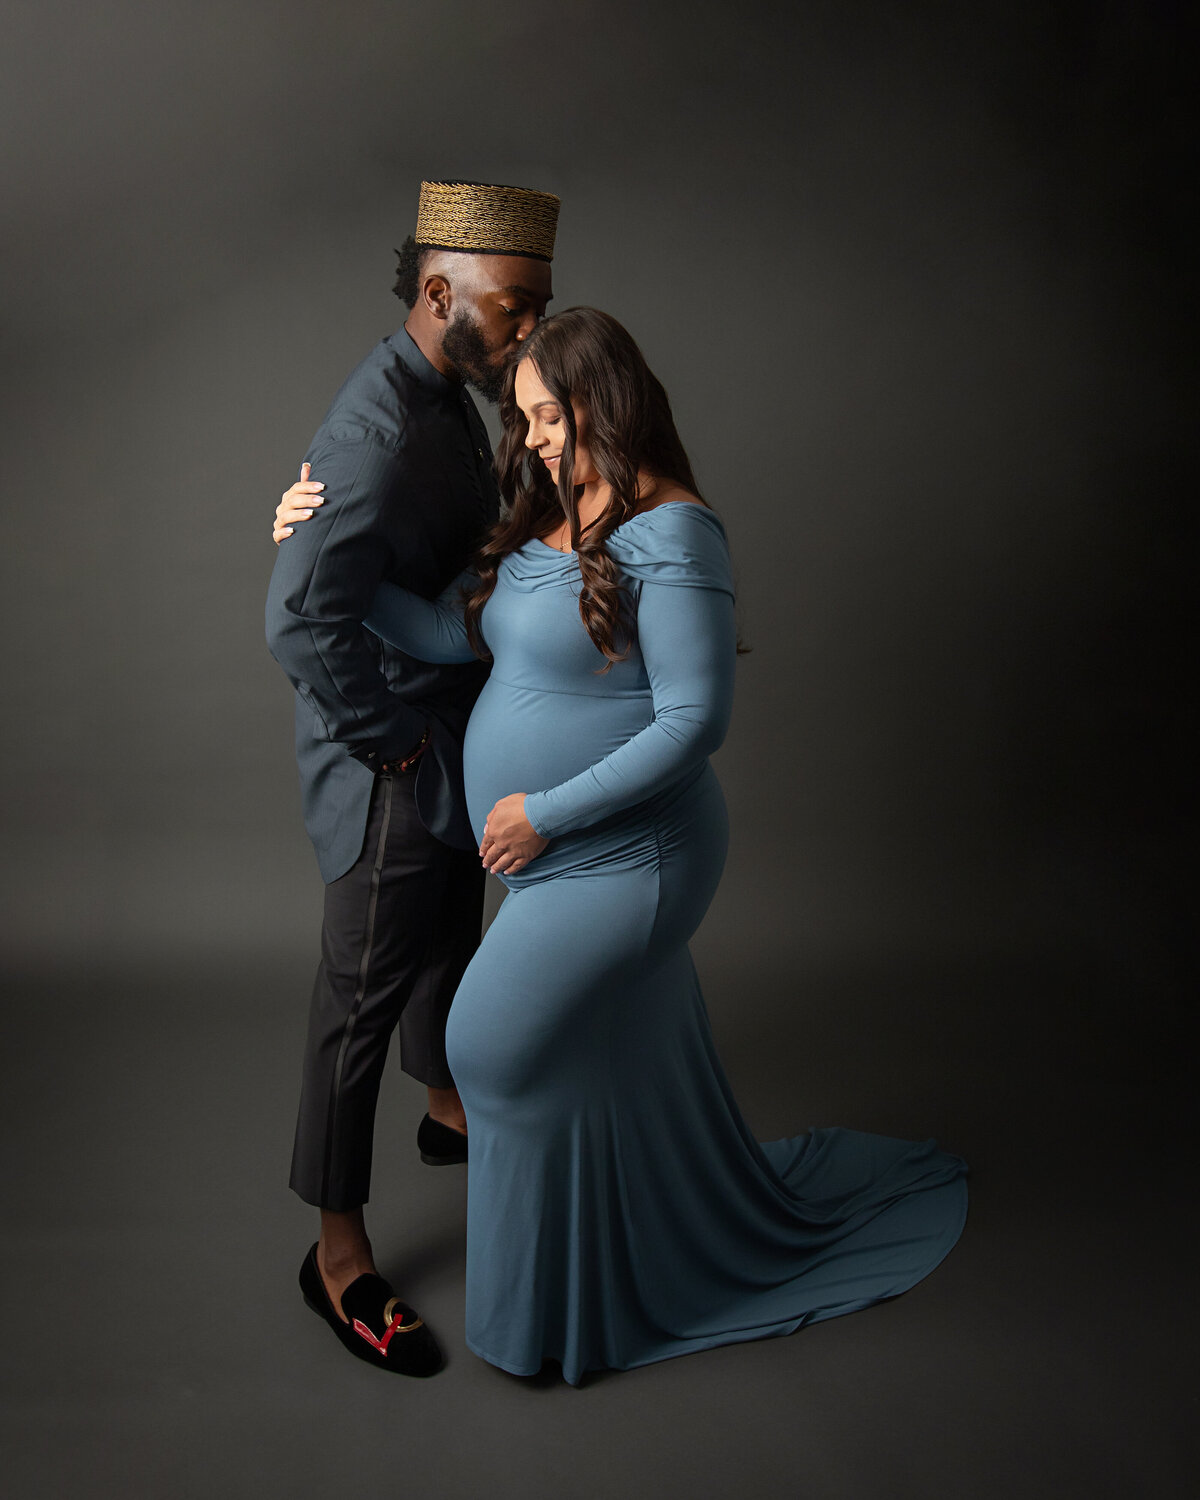 Couples-maternity-posing-south-jersey